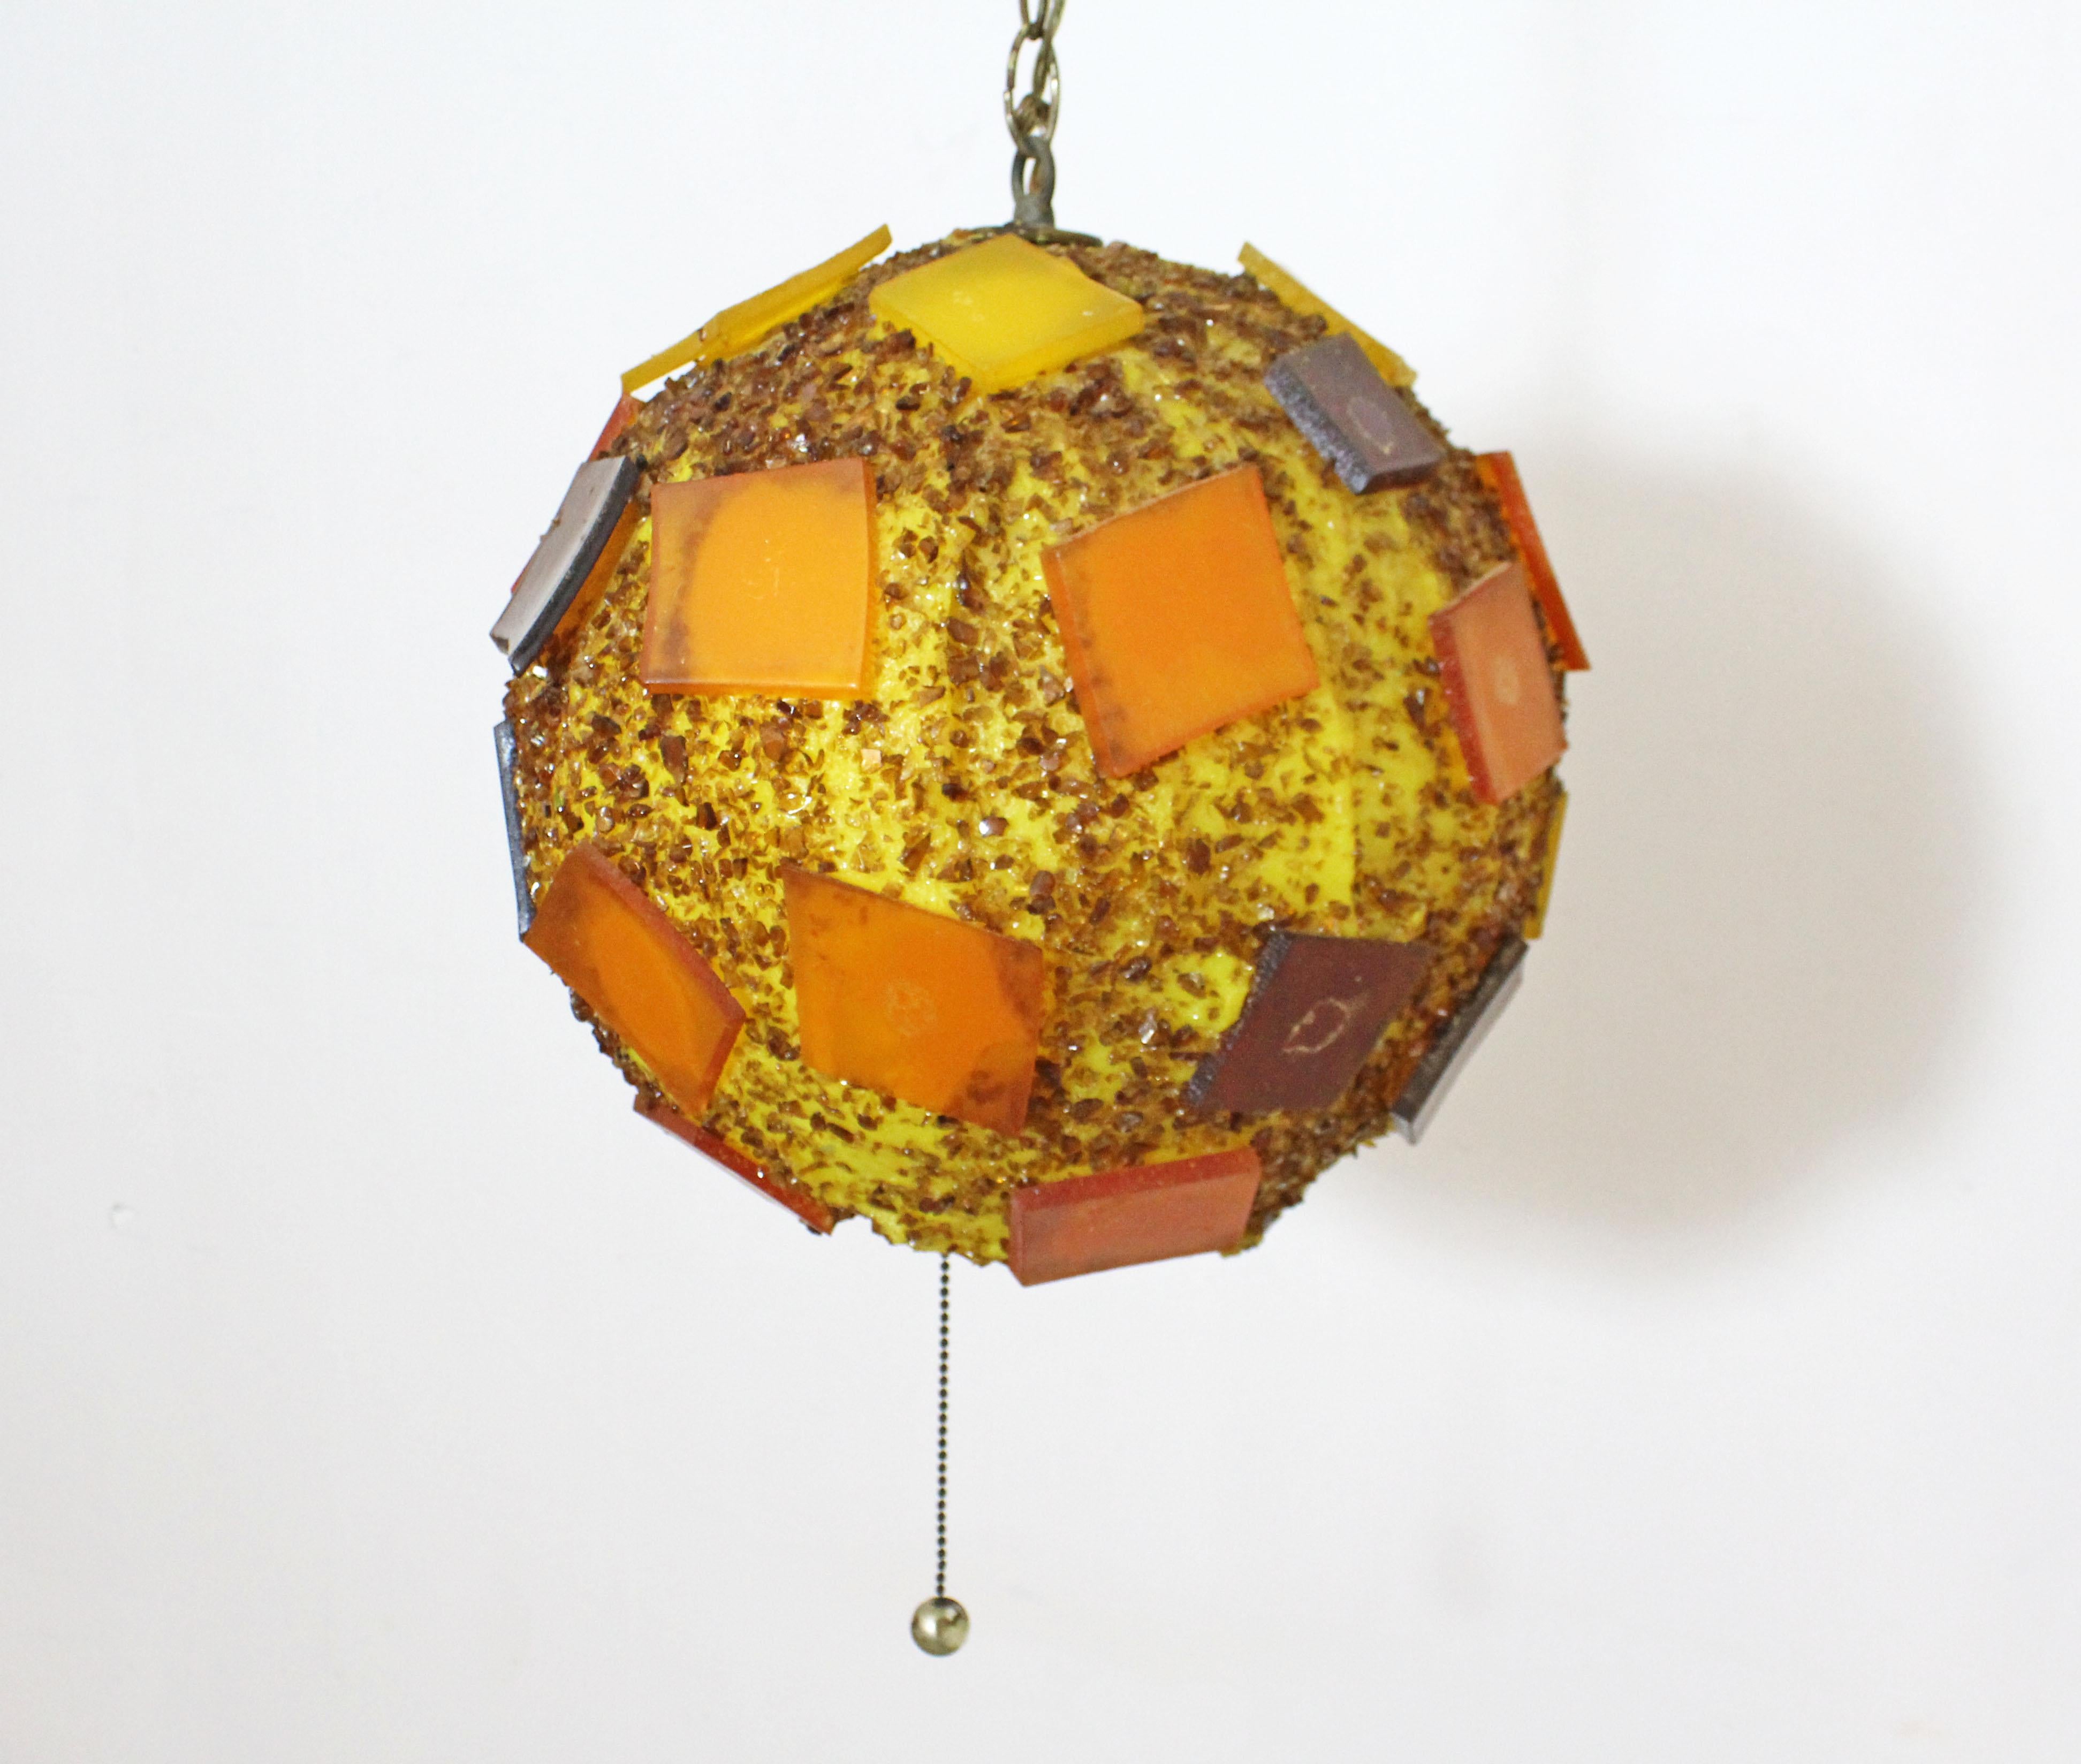 Offered is a one-of-a-kind round retro pendant lamp made with pieces of resin with a long chain. It is in excellent working condition for its age. Has some surface/age wear on resin and metal. Light has been tested. Really cool lighting for any